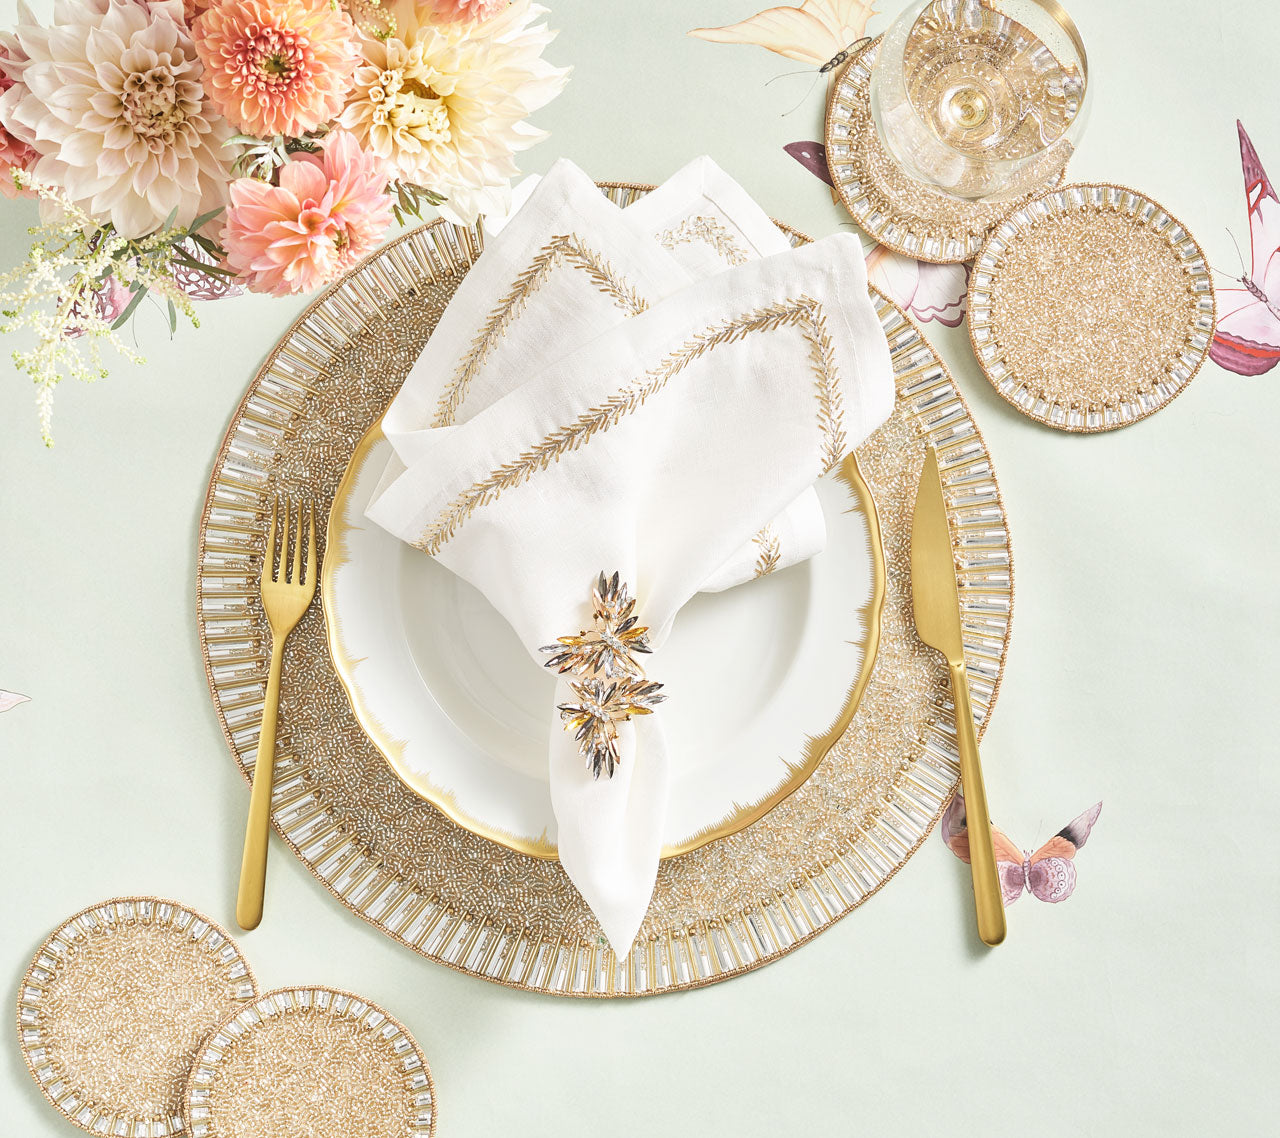 Bevel Drink Coasters next to a place setting with a beaded placemat and gold cutlery